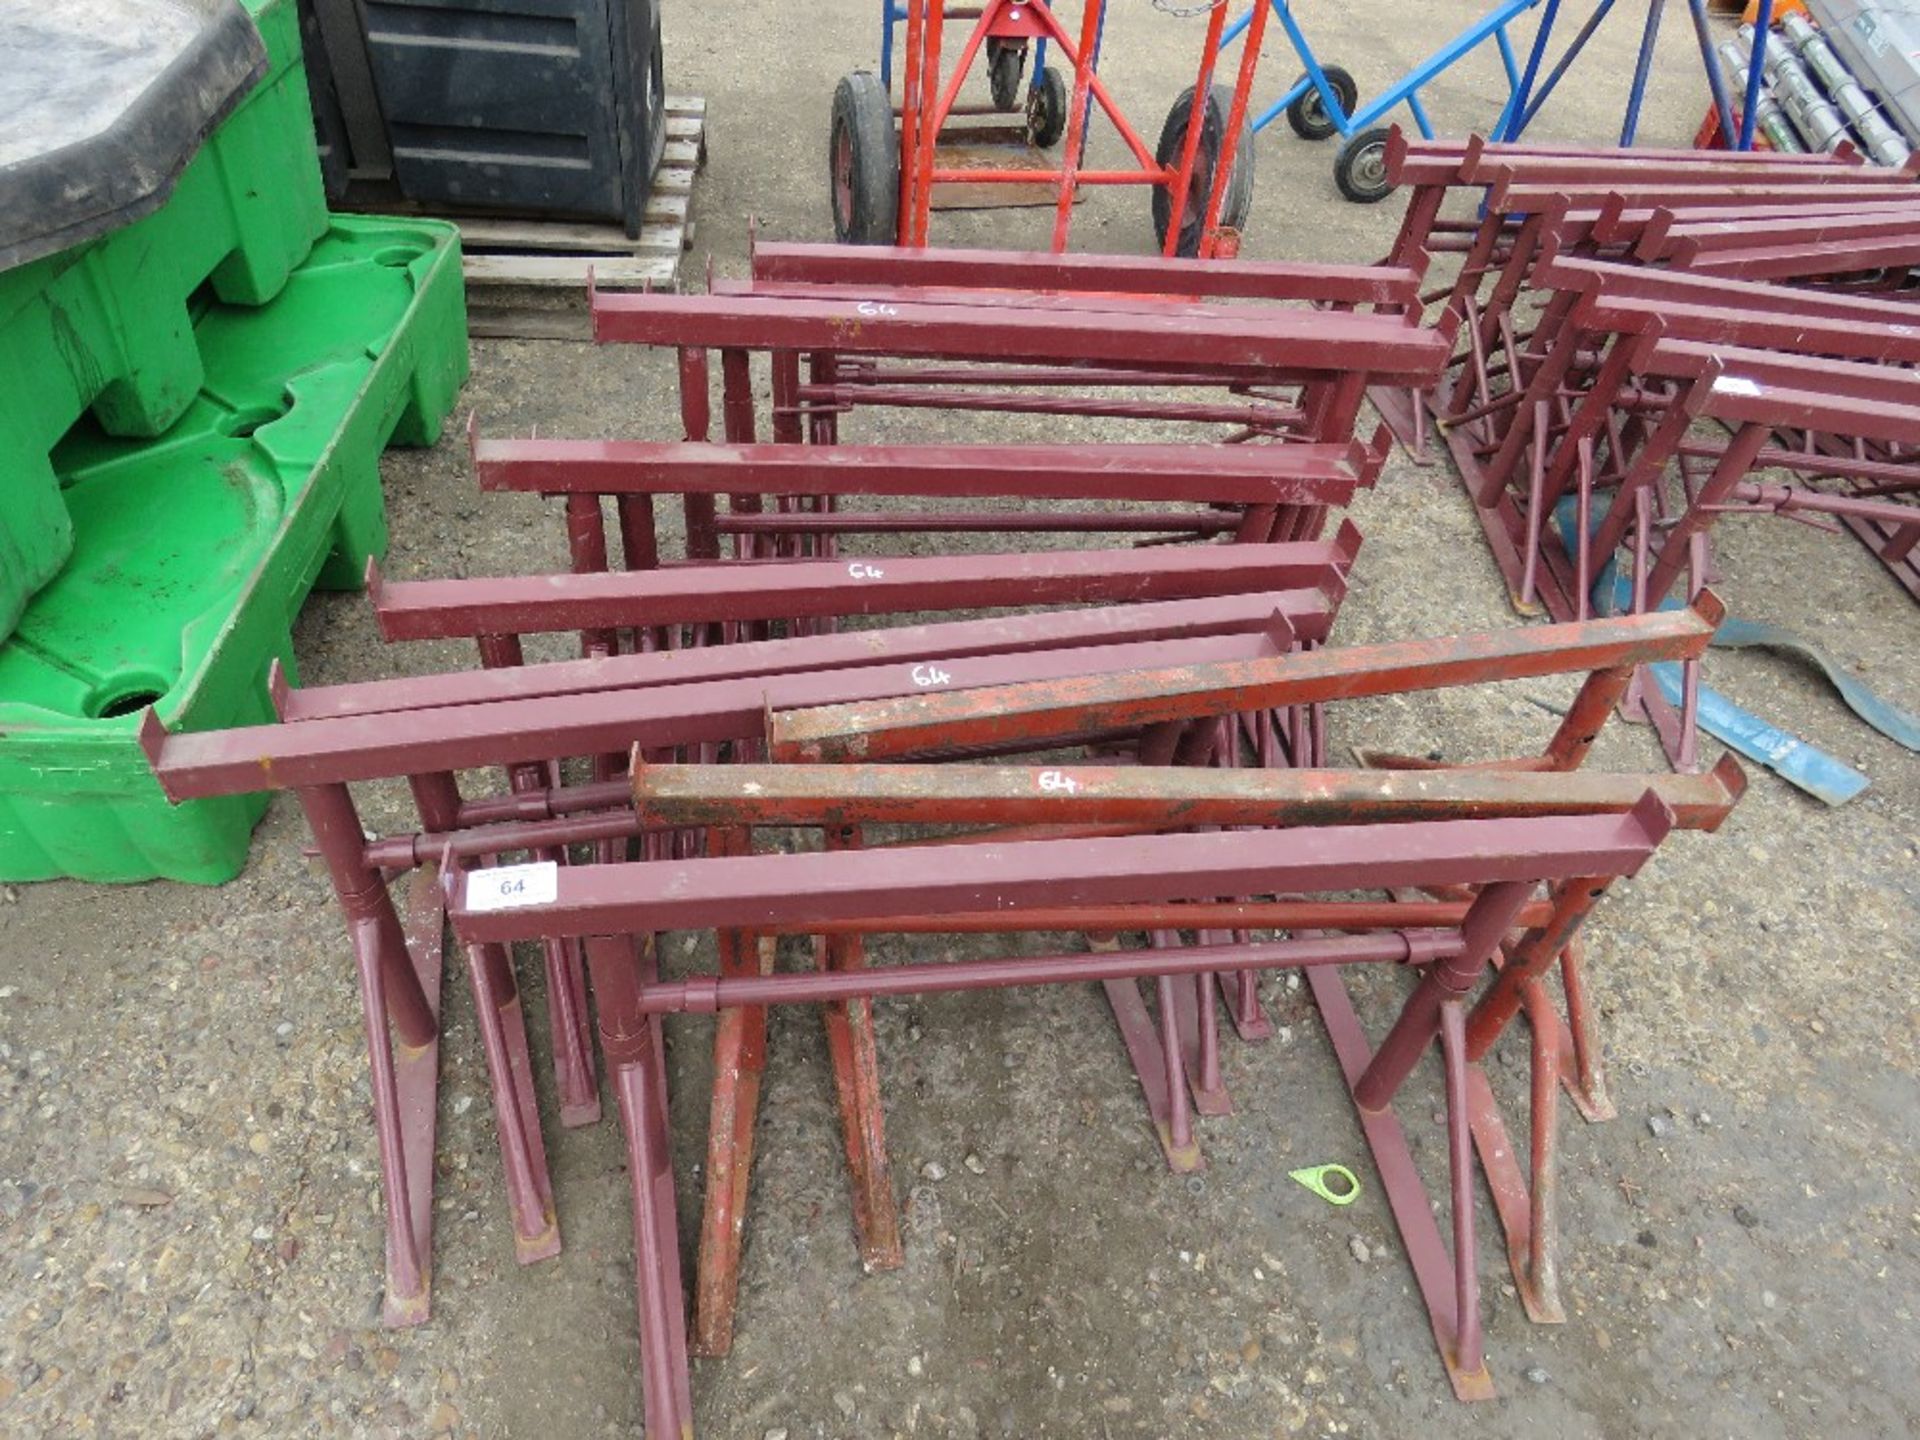 12 X SMALL SIZED BUILDER'S TRESTLES. 10 NEW, 2 USED